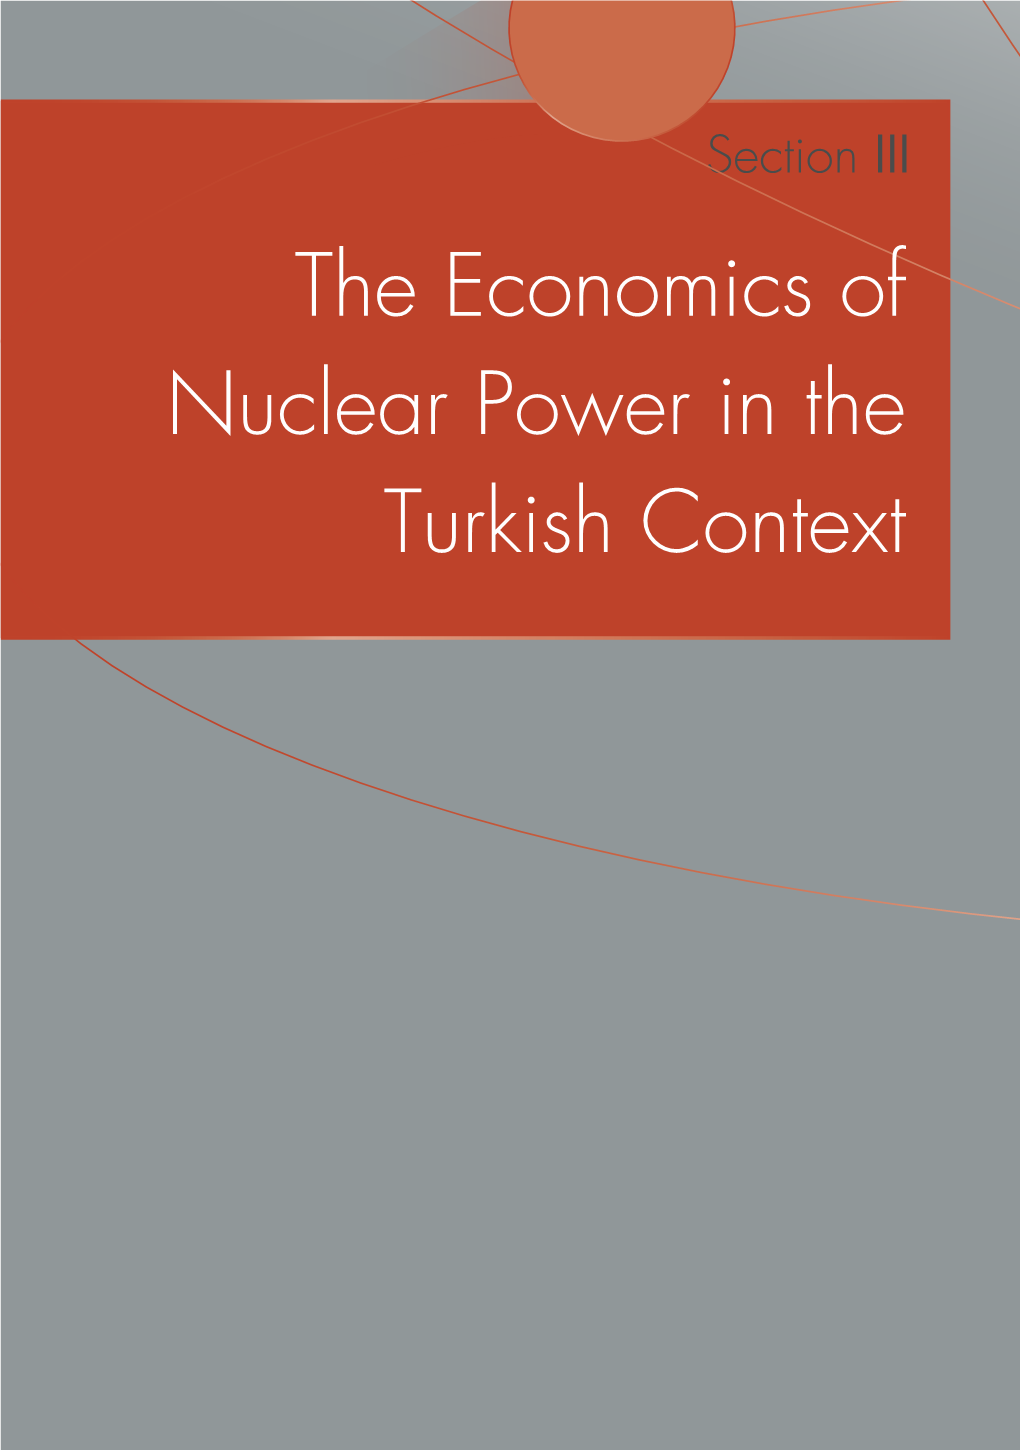 The Economics of Nuclear Power in the Turkish Context III